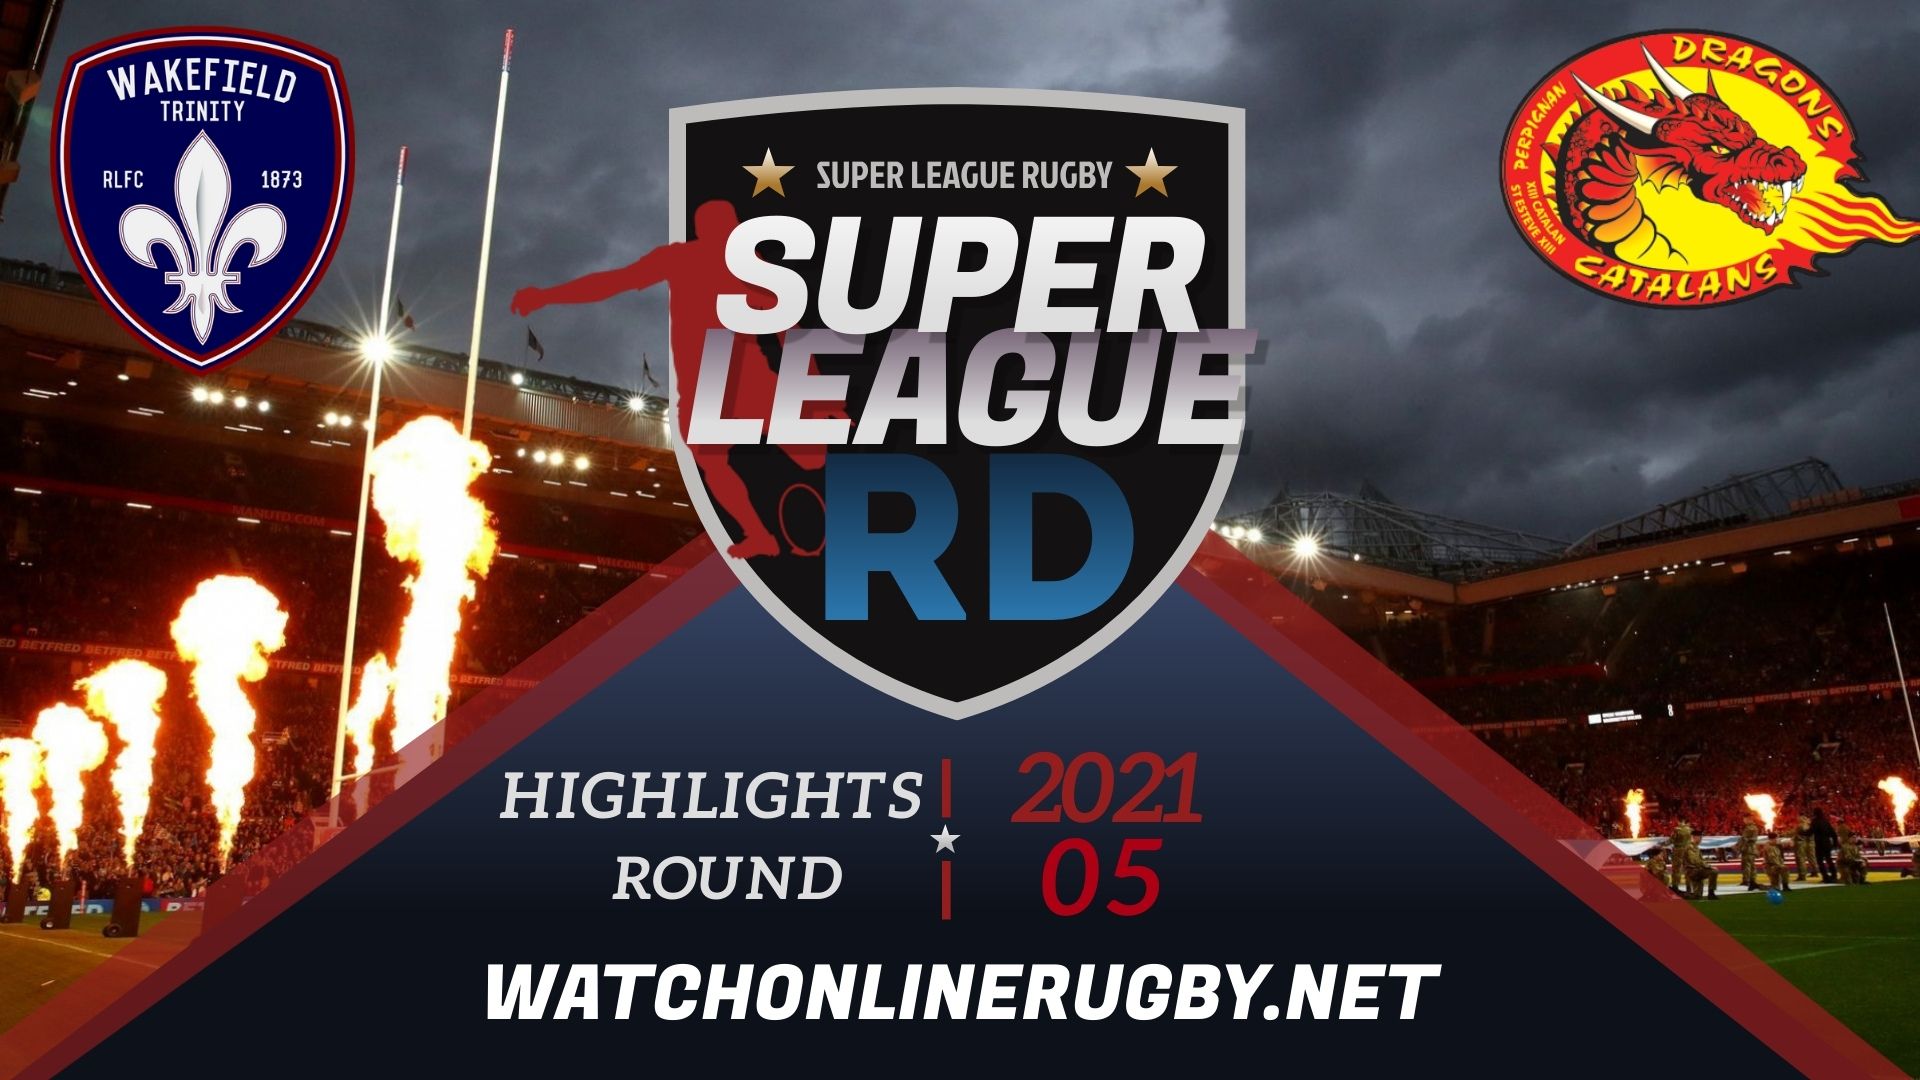 Wakefield Trinity Vs Catalans Dragons Super League Rugby 2021 RD 5